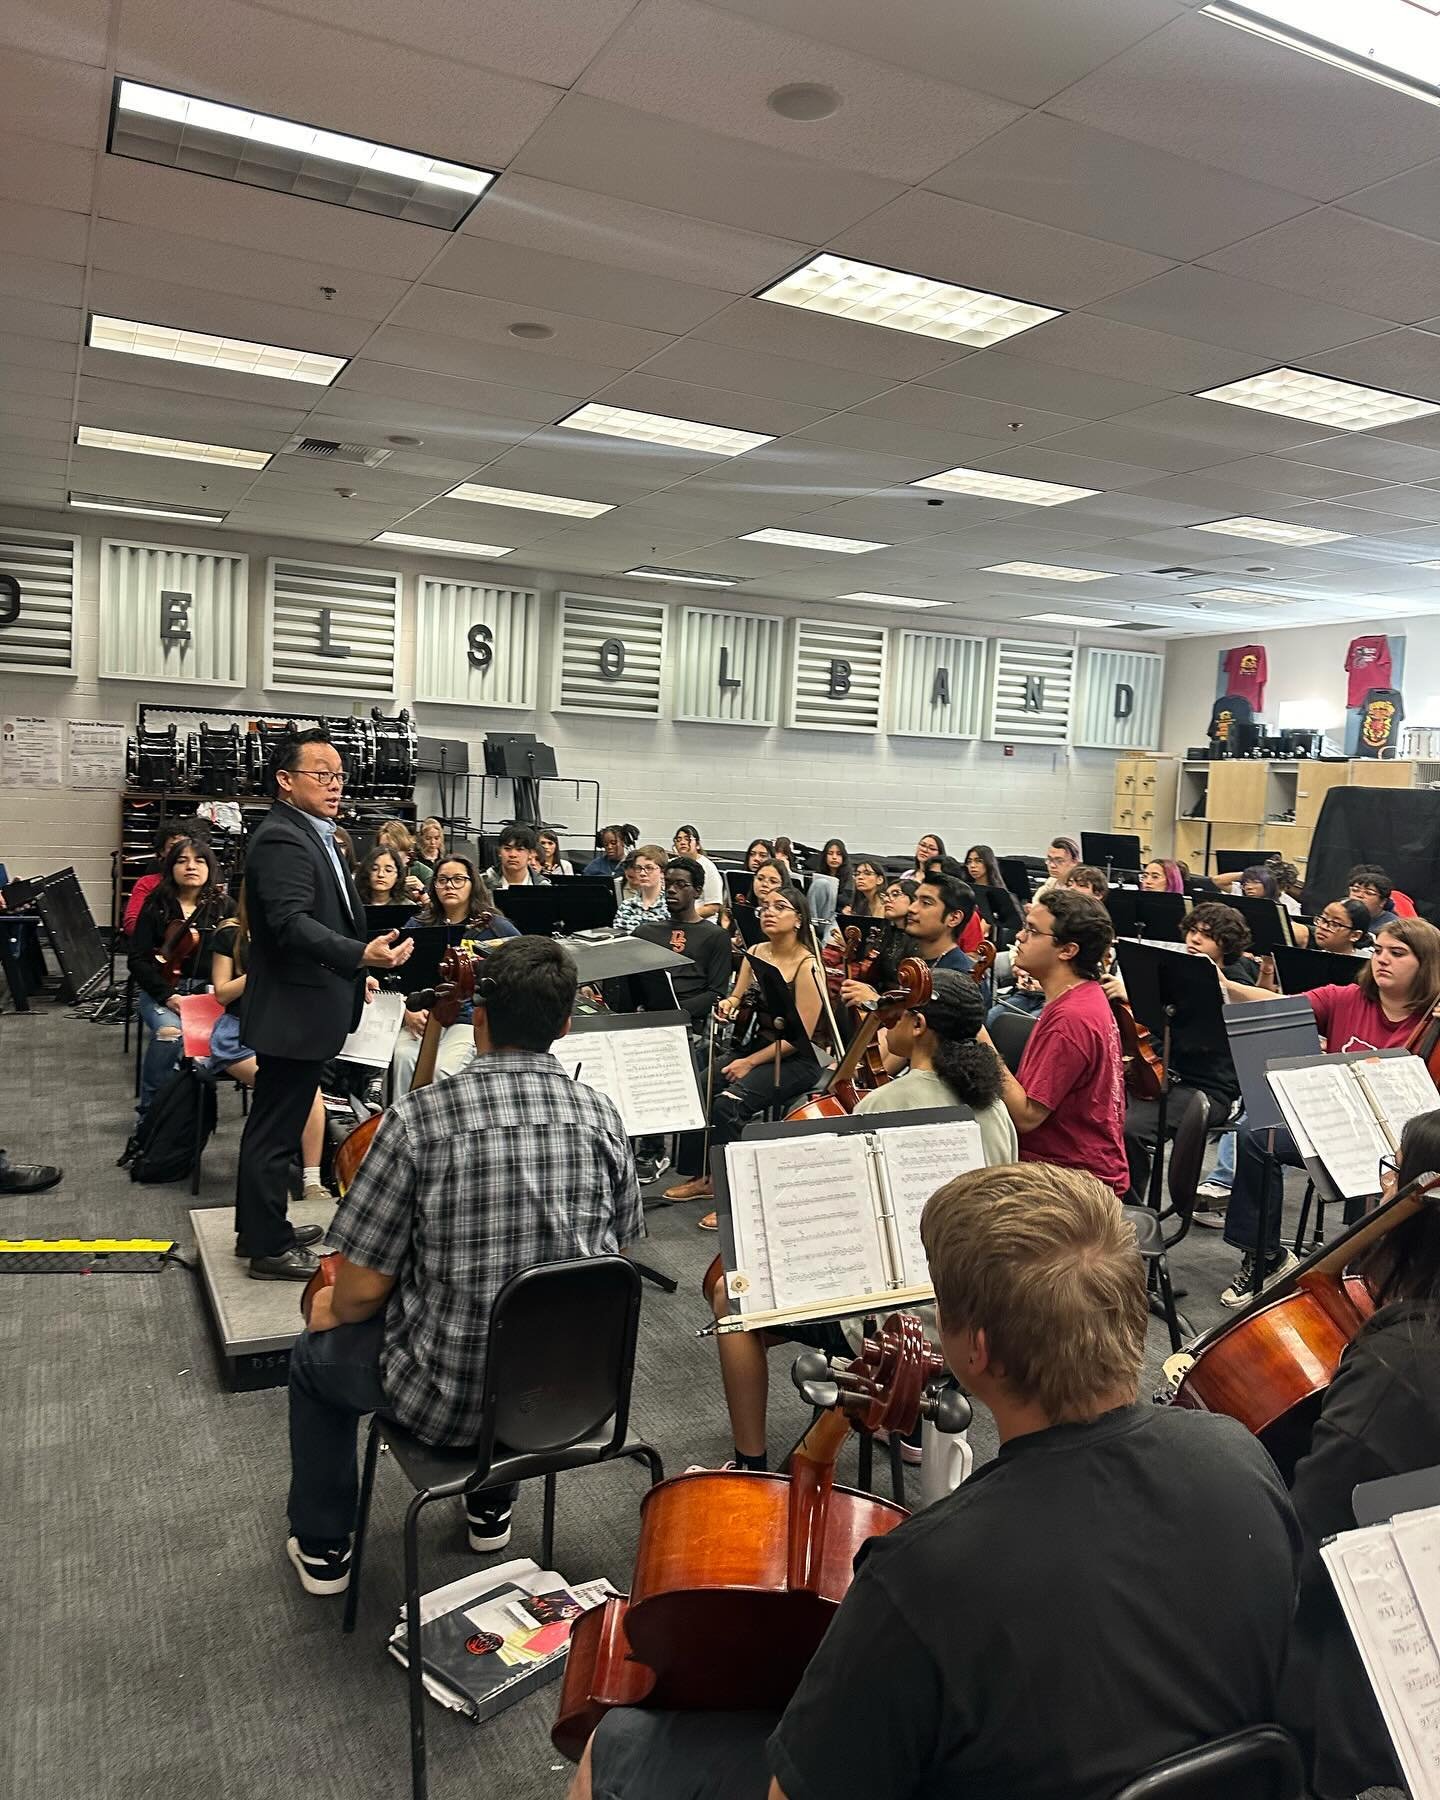 Thank you Dr. Gene Moon for visiting and sharing your talent with our DSA Philharmonic Orchestra!

@genemoon_conductor 
@dsa_band 
#orchestra #philharmonic